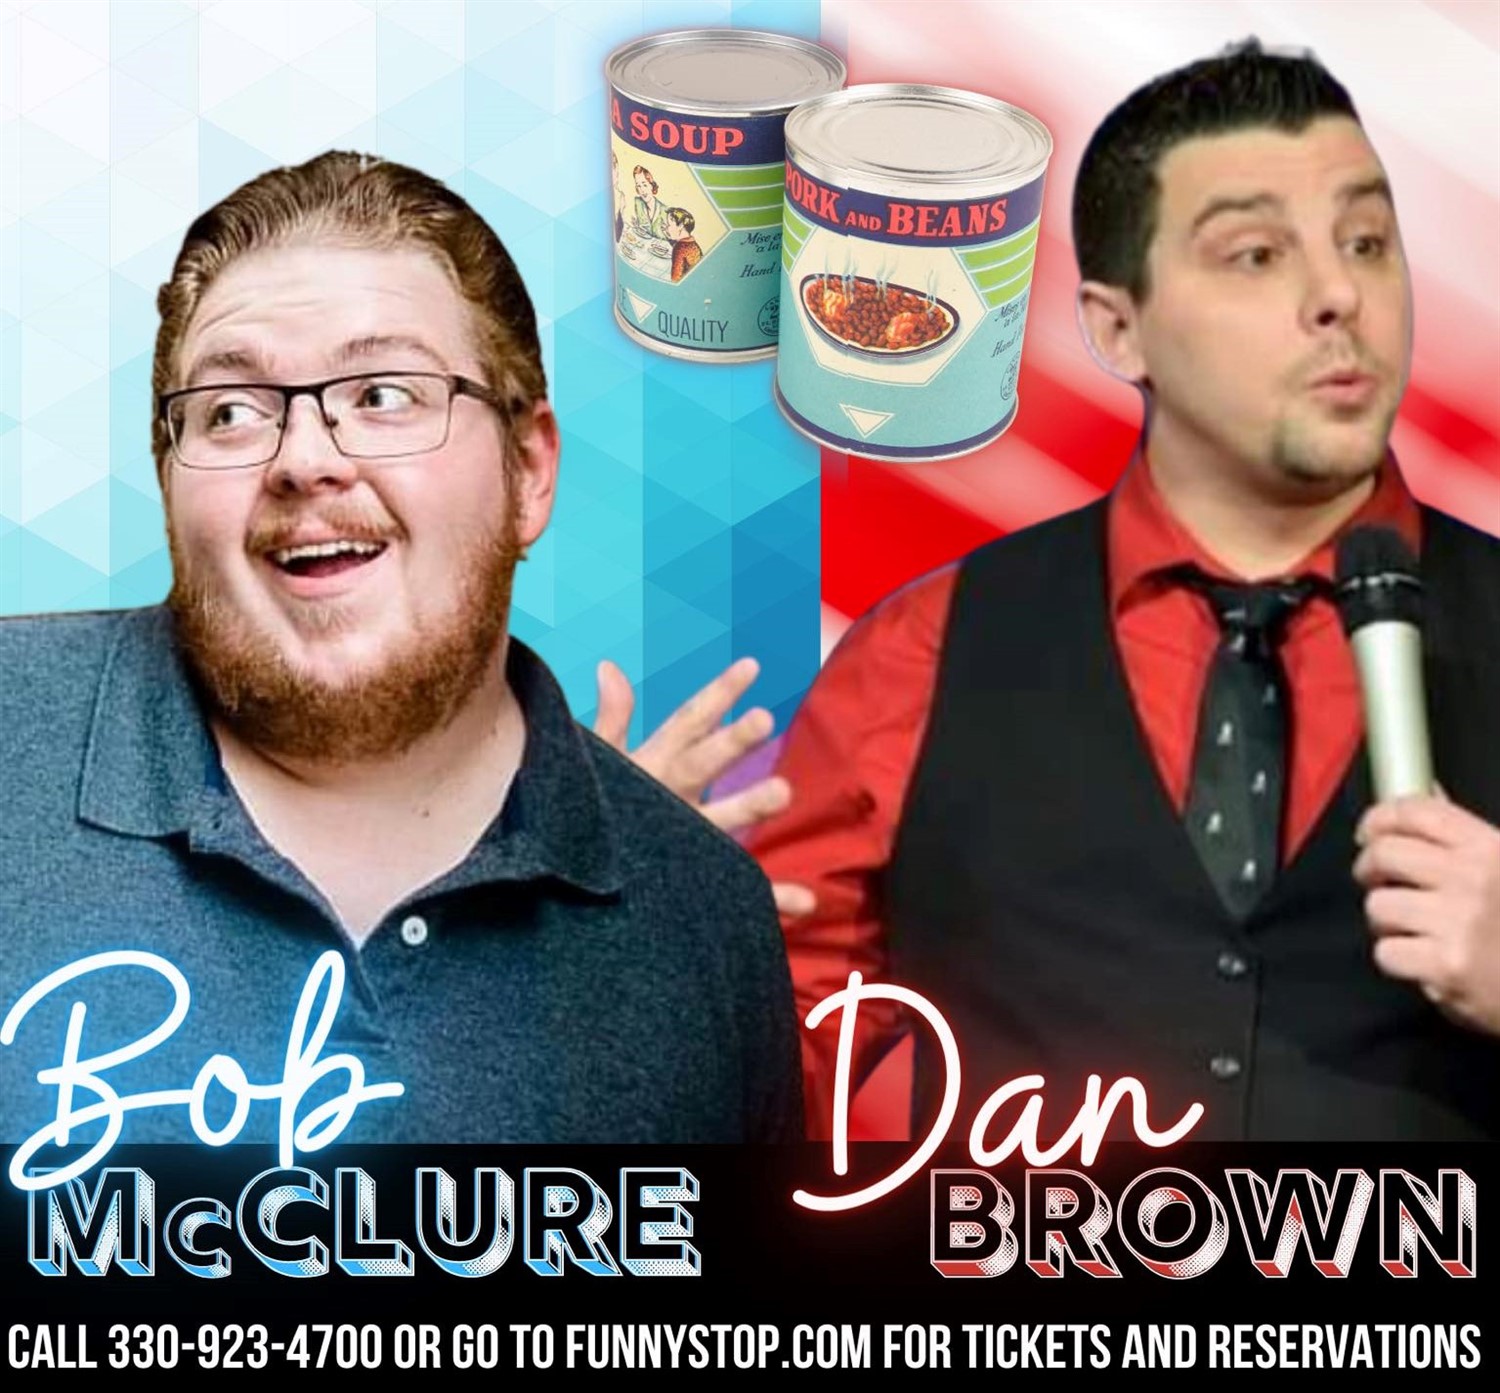 Bob McClure and Dan Brown 7:20pm show Funny Stop Comedy Club on Dec 17, 19:20@Funny Stop Comedy Club - Buy tickets and Get information on Funny Stop funnystop.online